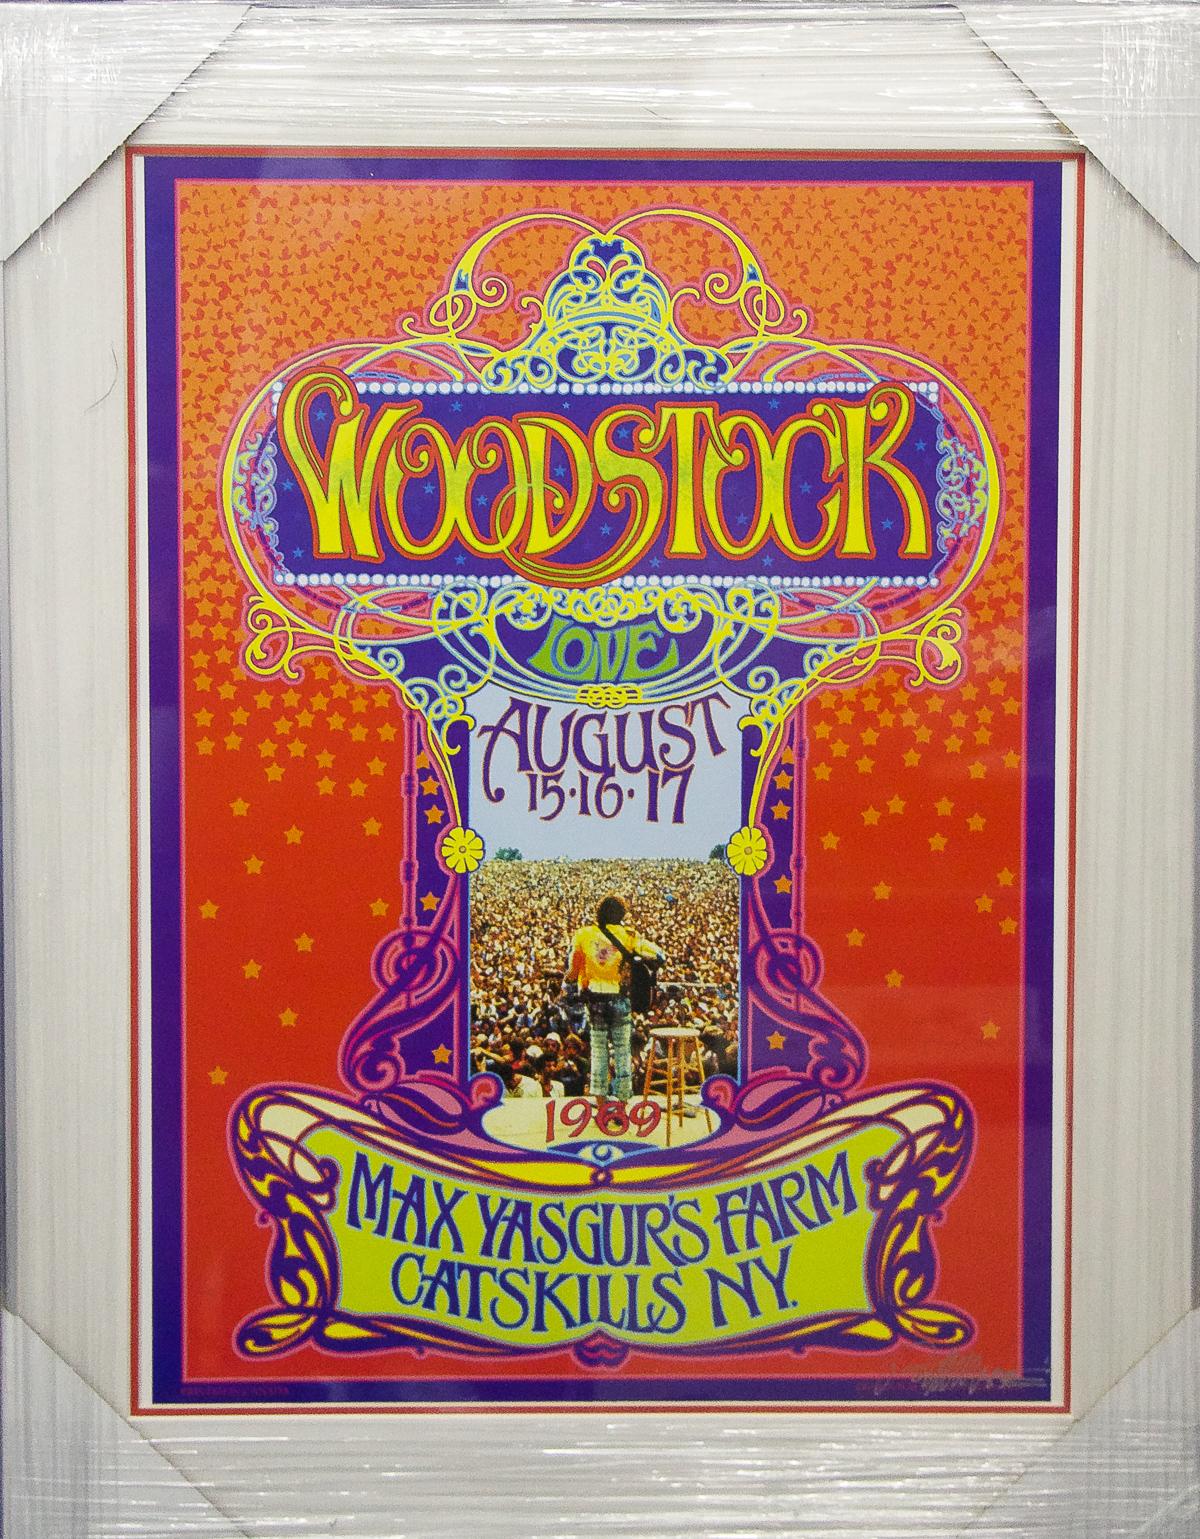 1969 Woodstock Poster Featured on Limited Edition Collector's Envelope *OP447 